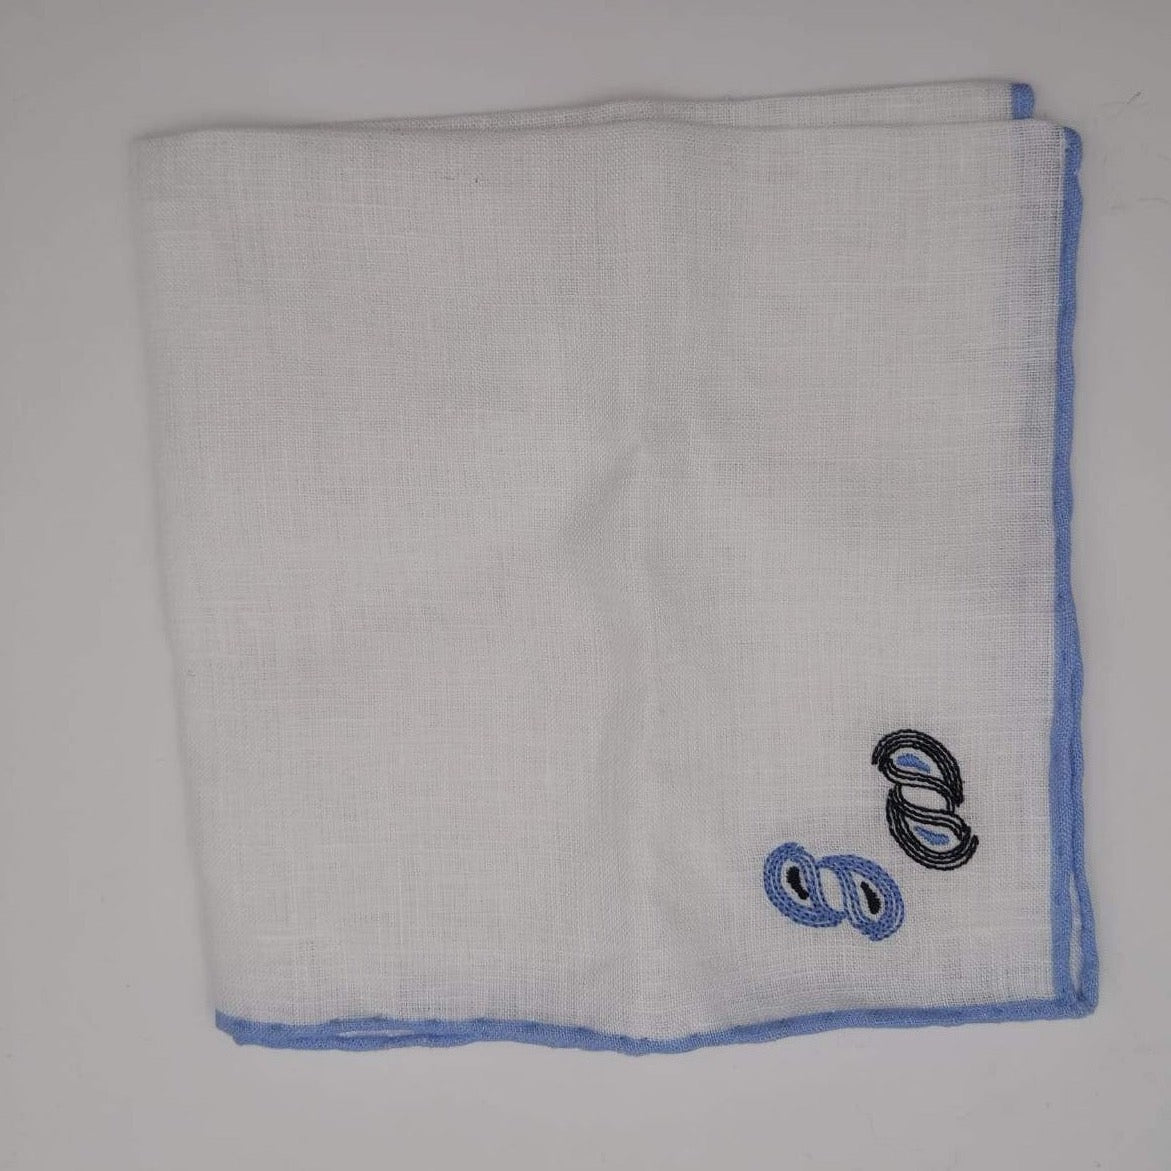 Cruciani & Bella 100% Linen Hand-rolled  -  Pocket Square White and Light Blue Paisley Handmade in Italy 31 cm X 31cm #3338